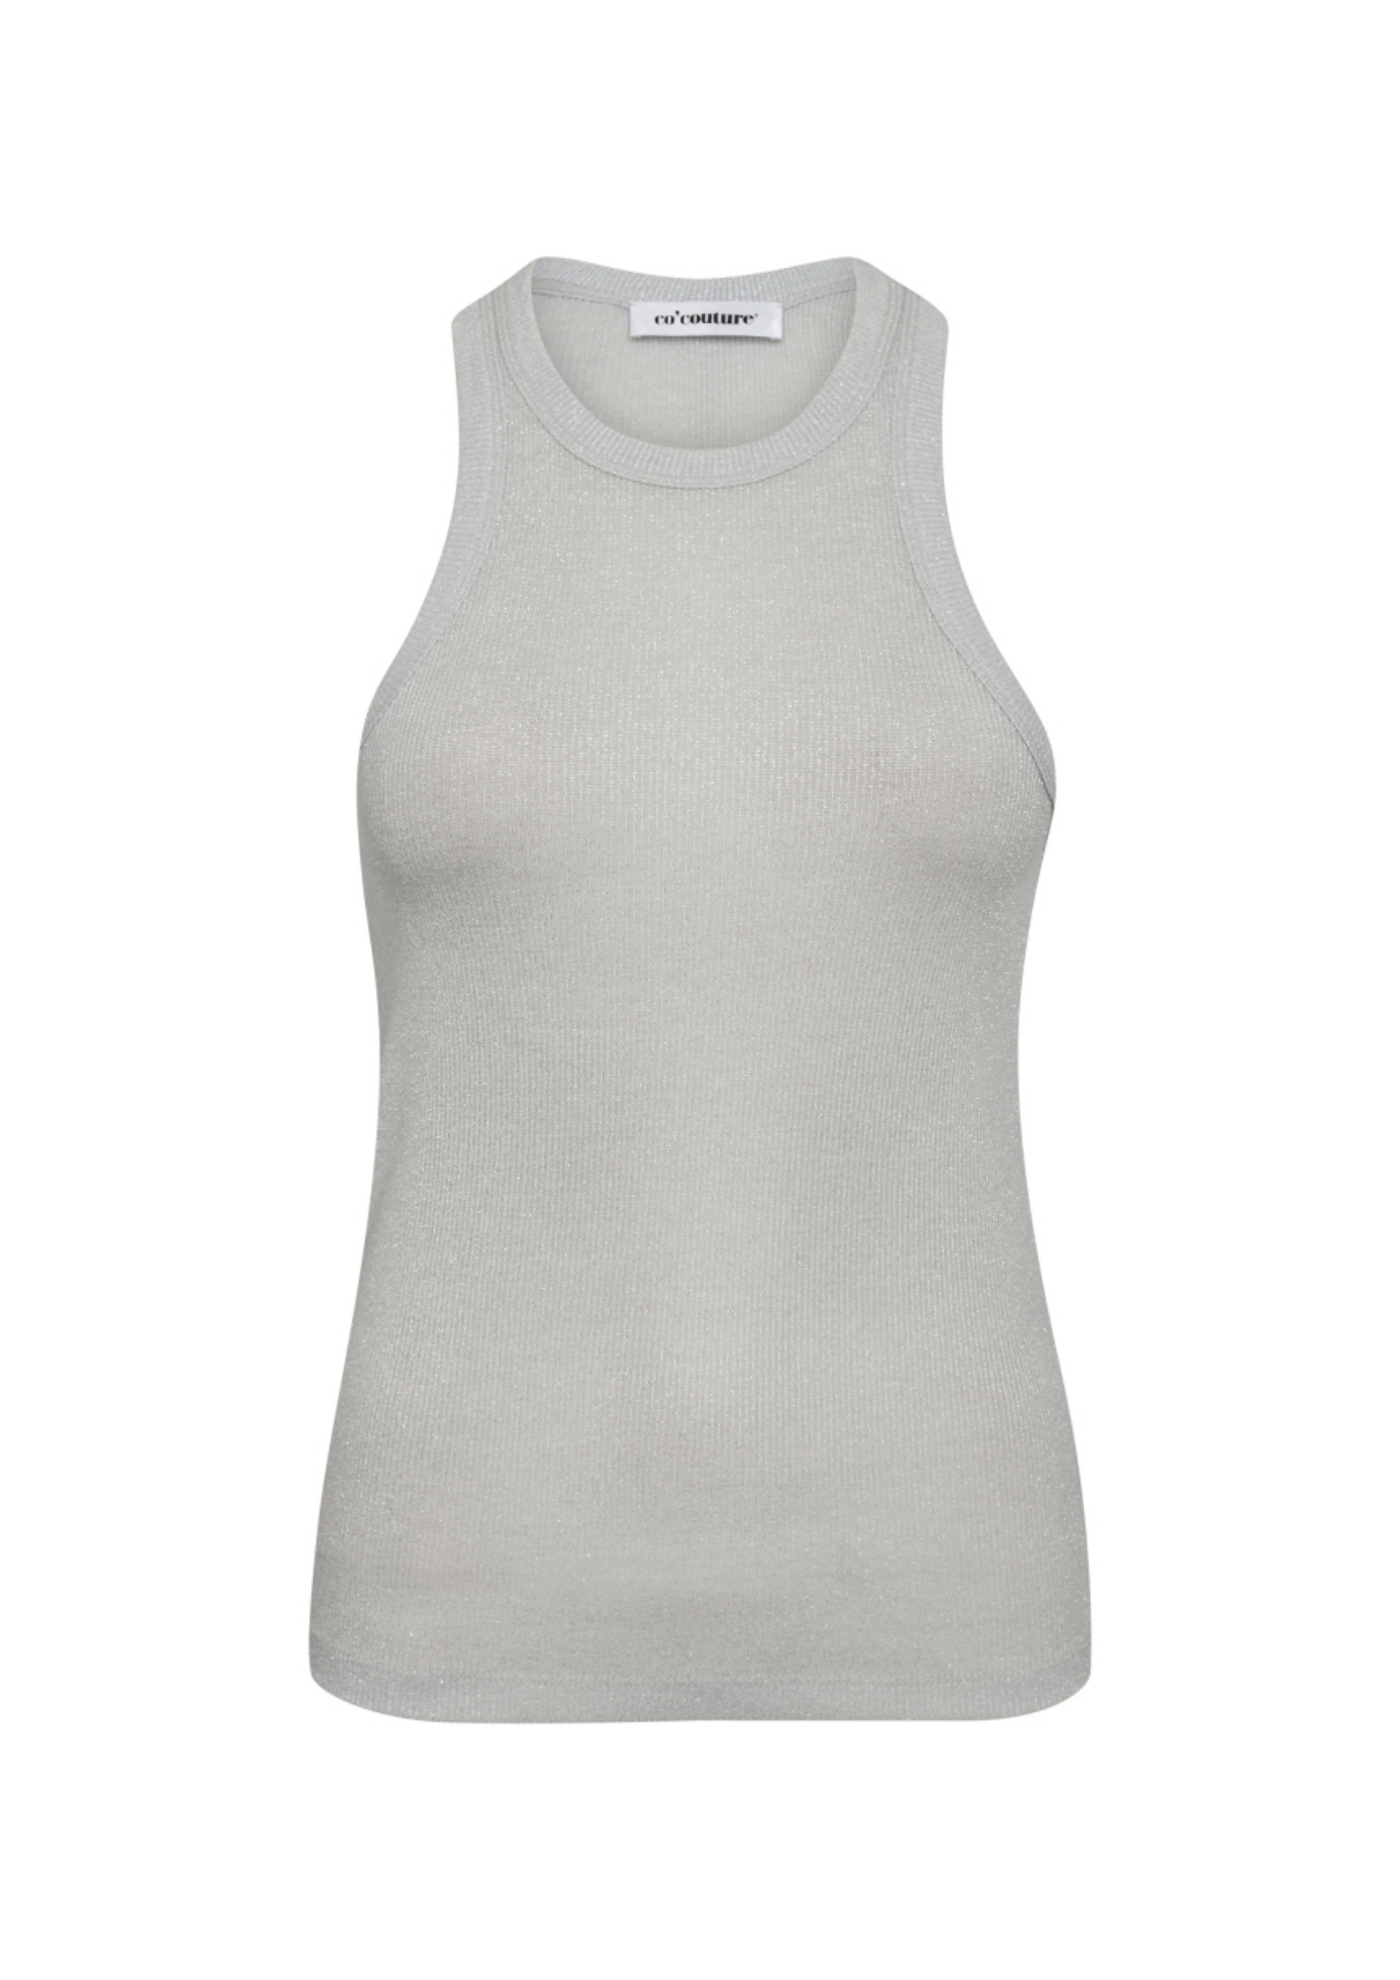 Co' Couture | SaharaCC Glitter Tank Top Zilver